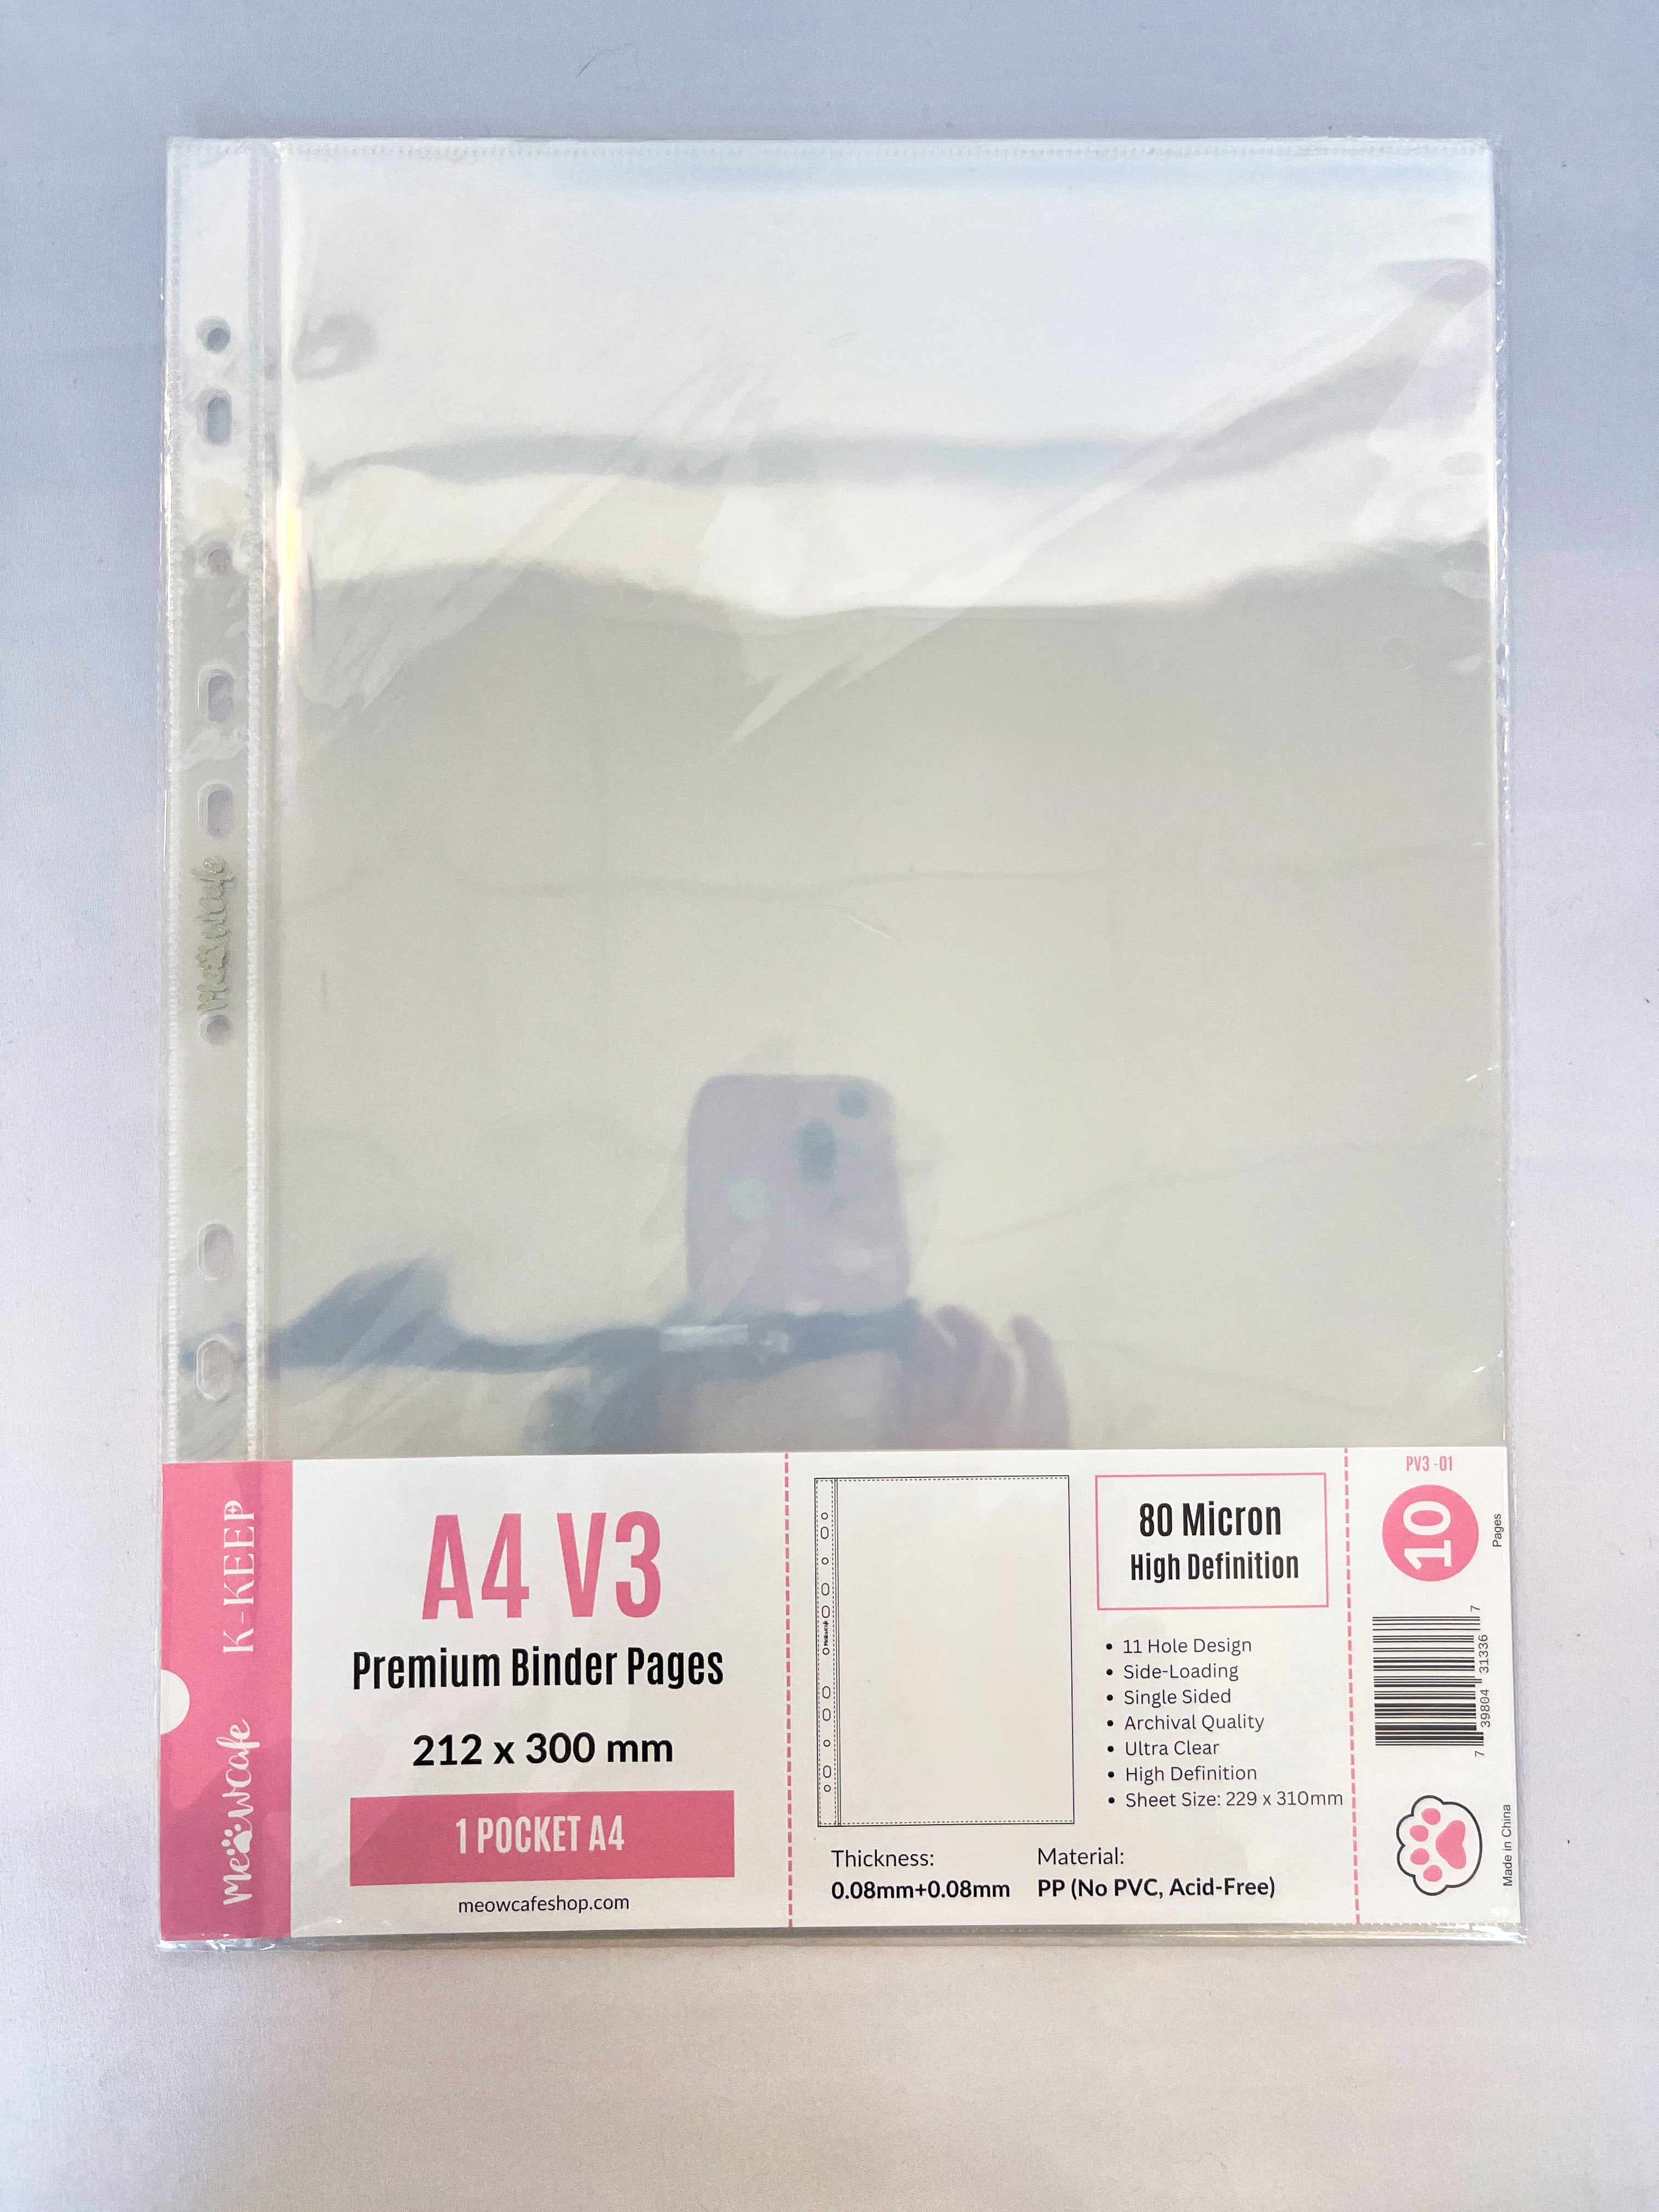 K-KEEP [A4 V3] -  1 Pocket - 11 Holes Premium Binder Pages, 80 Micron Thick, High Definition (Pack of 10) - (PV3-01))